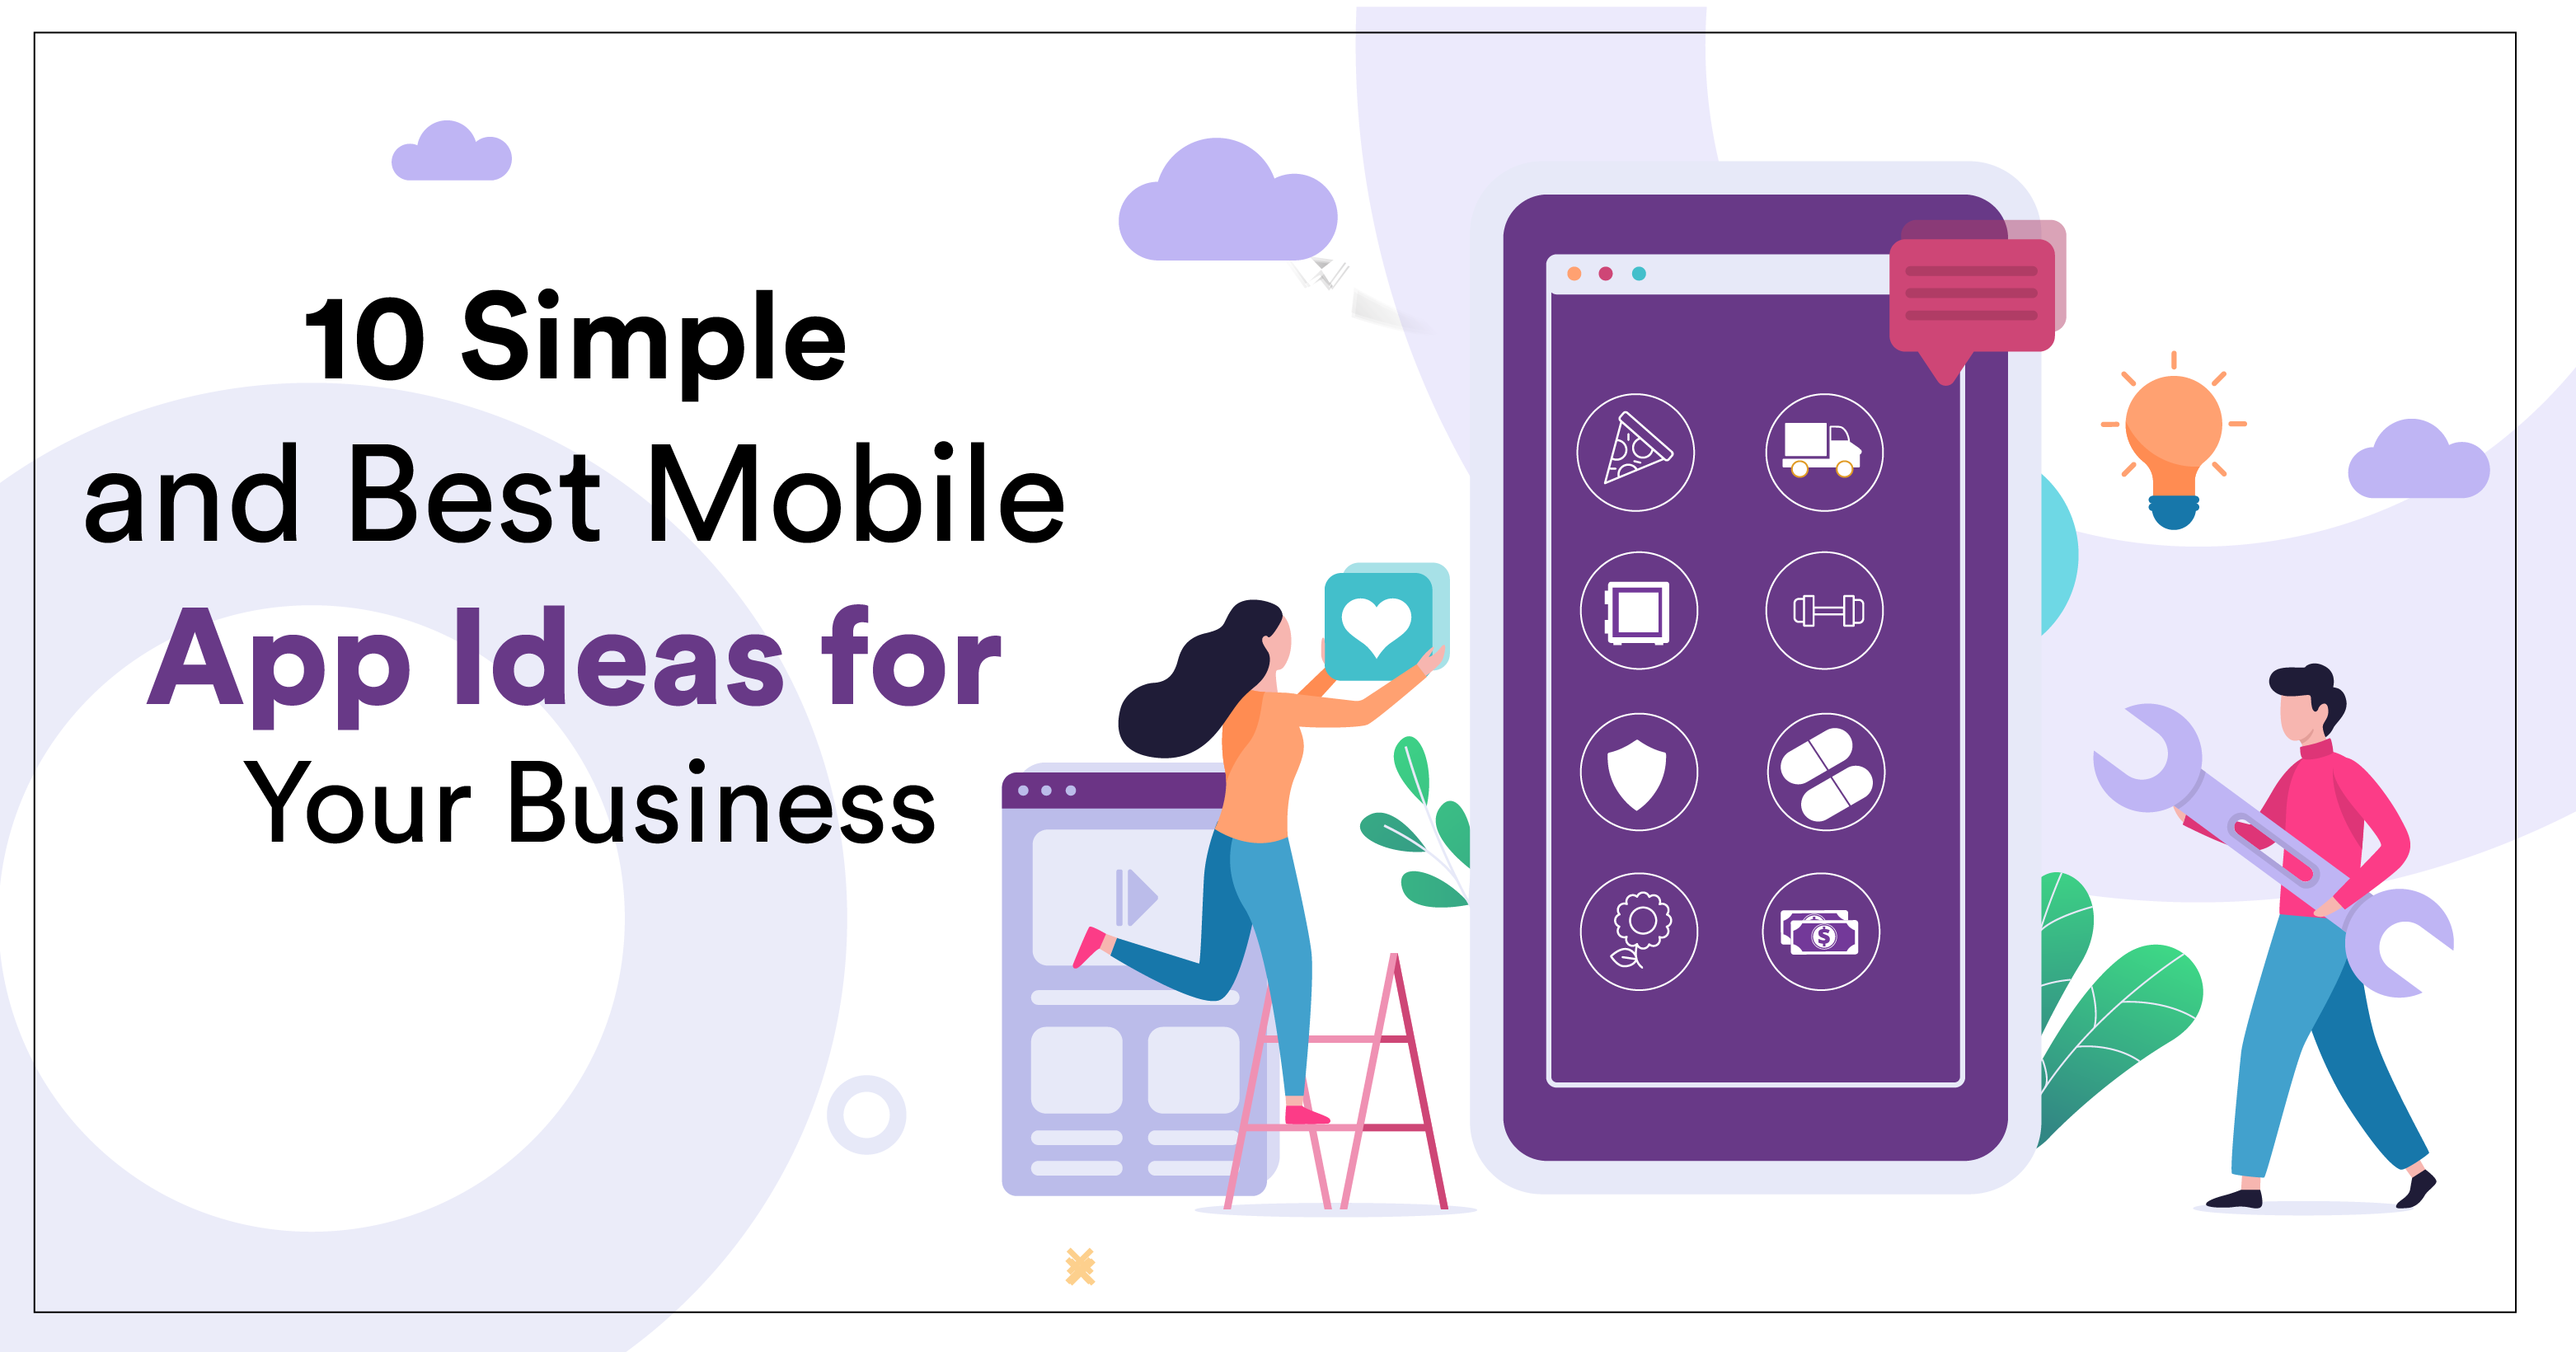 10 Simple and Best Mobile App Ideas for Your Business